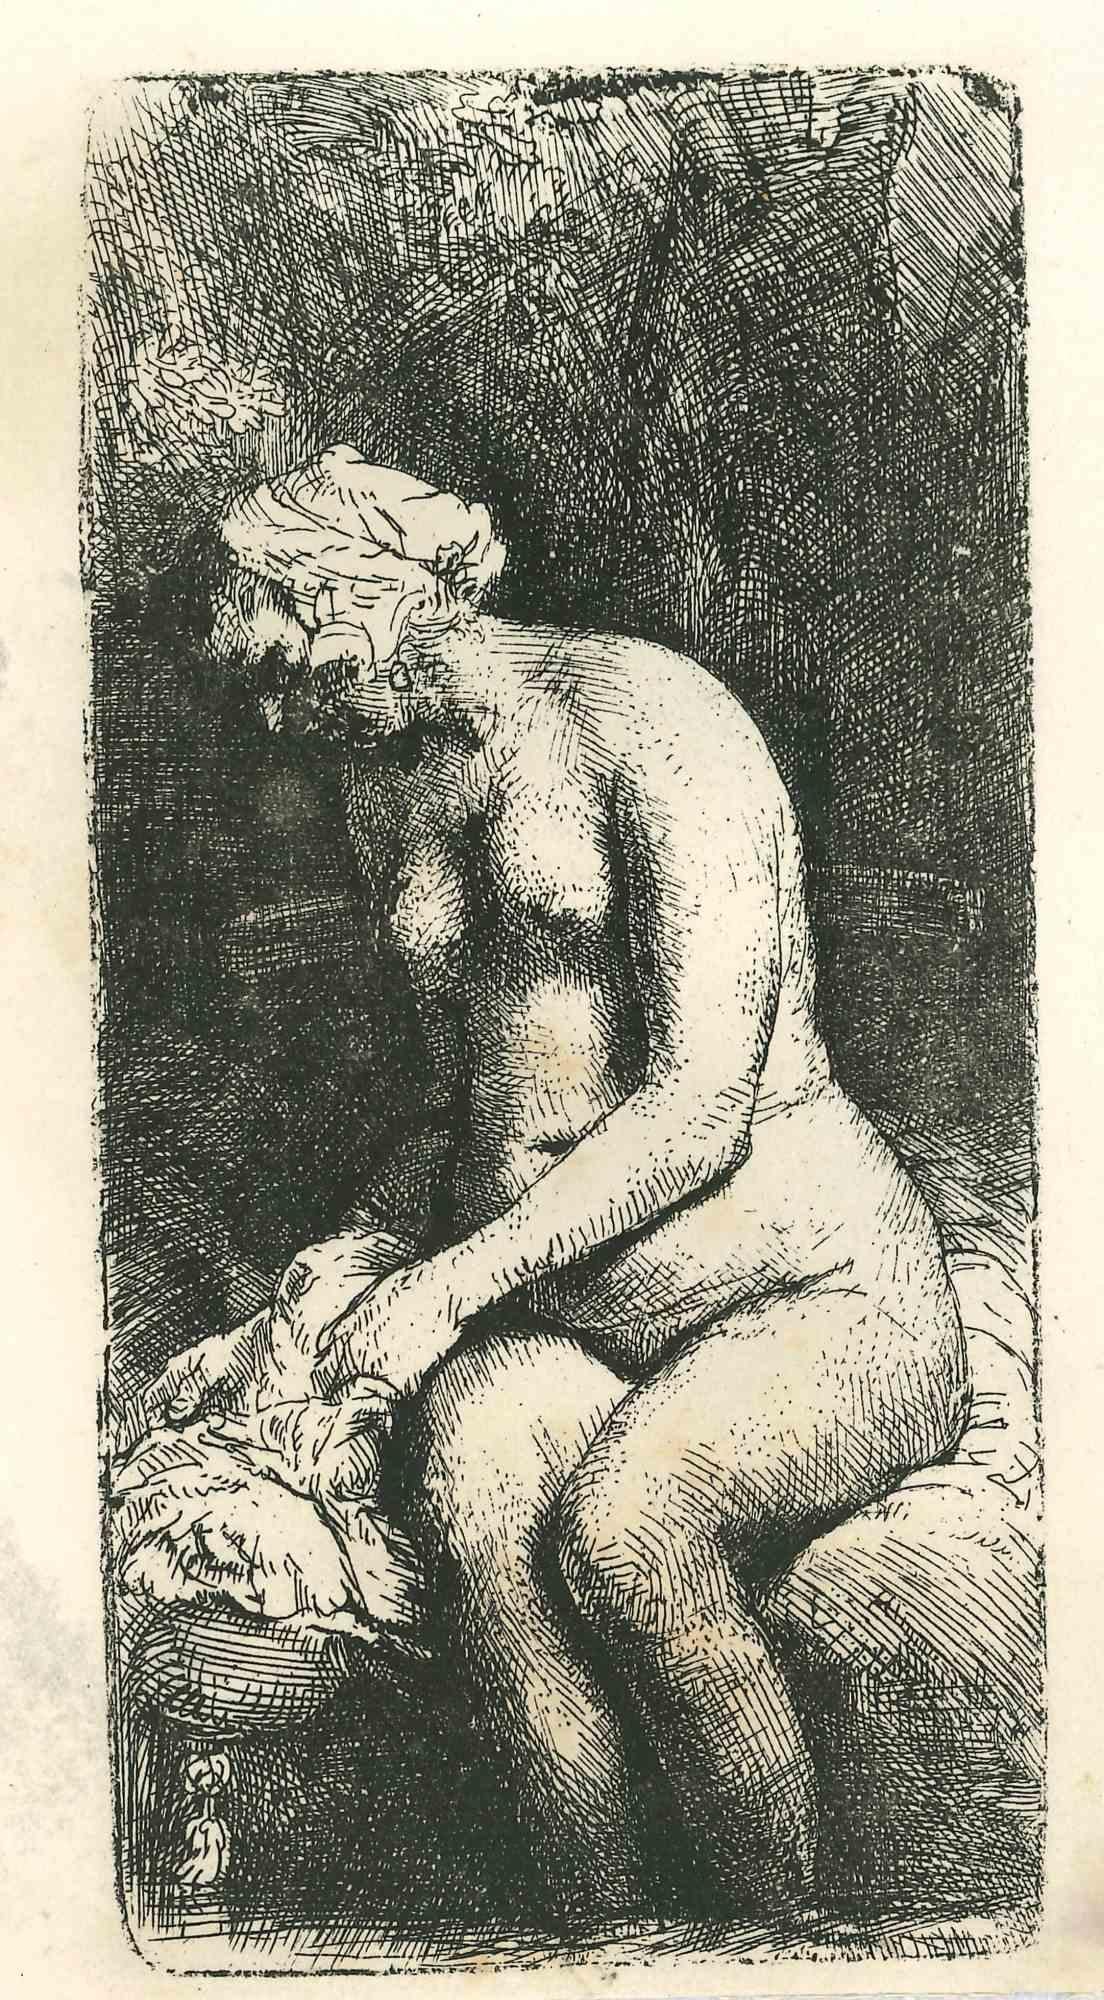 Charles Amand Durand Portrait Print - Seated Woman Holding her Shirt - Engraving after Rembrandt - 19th Century